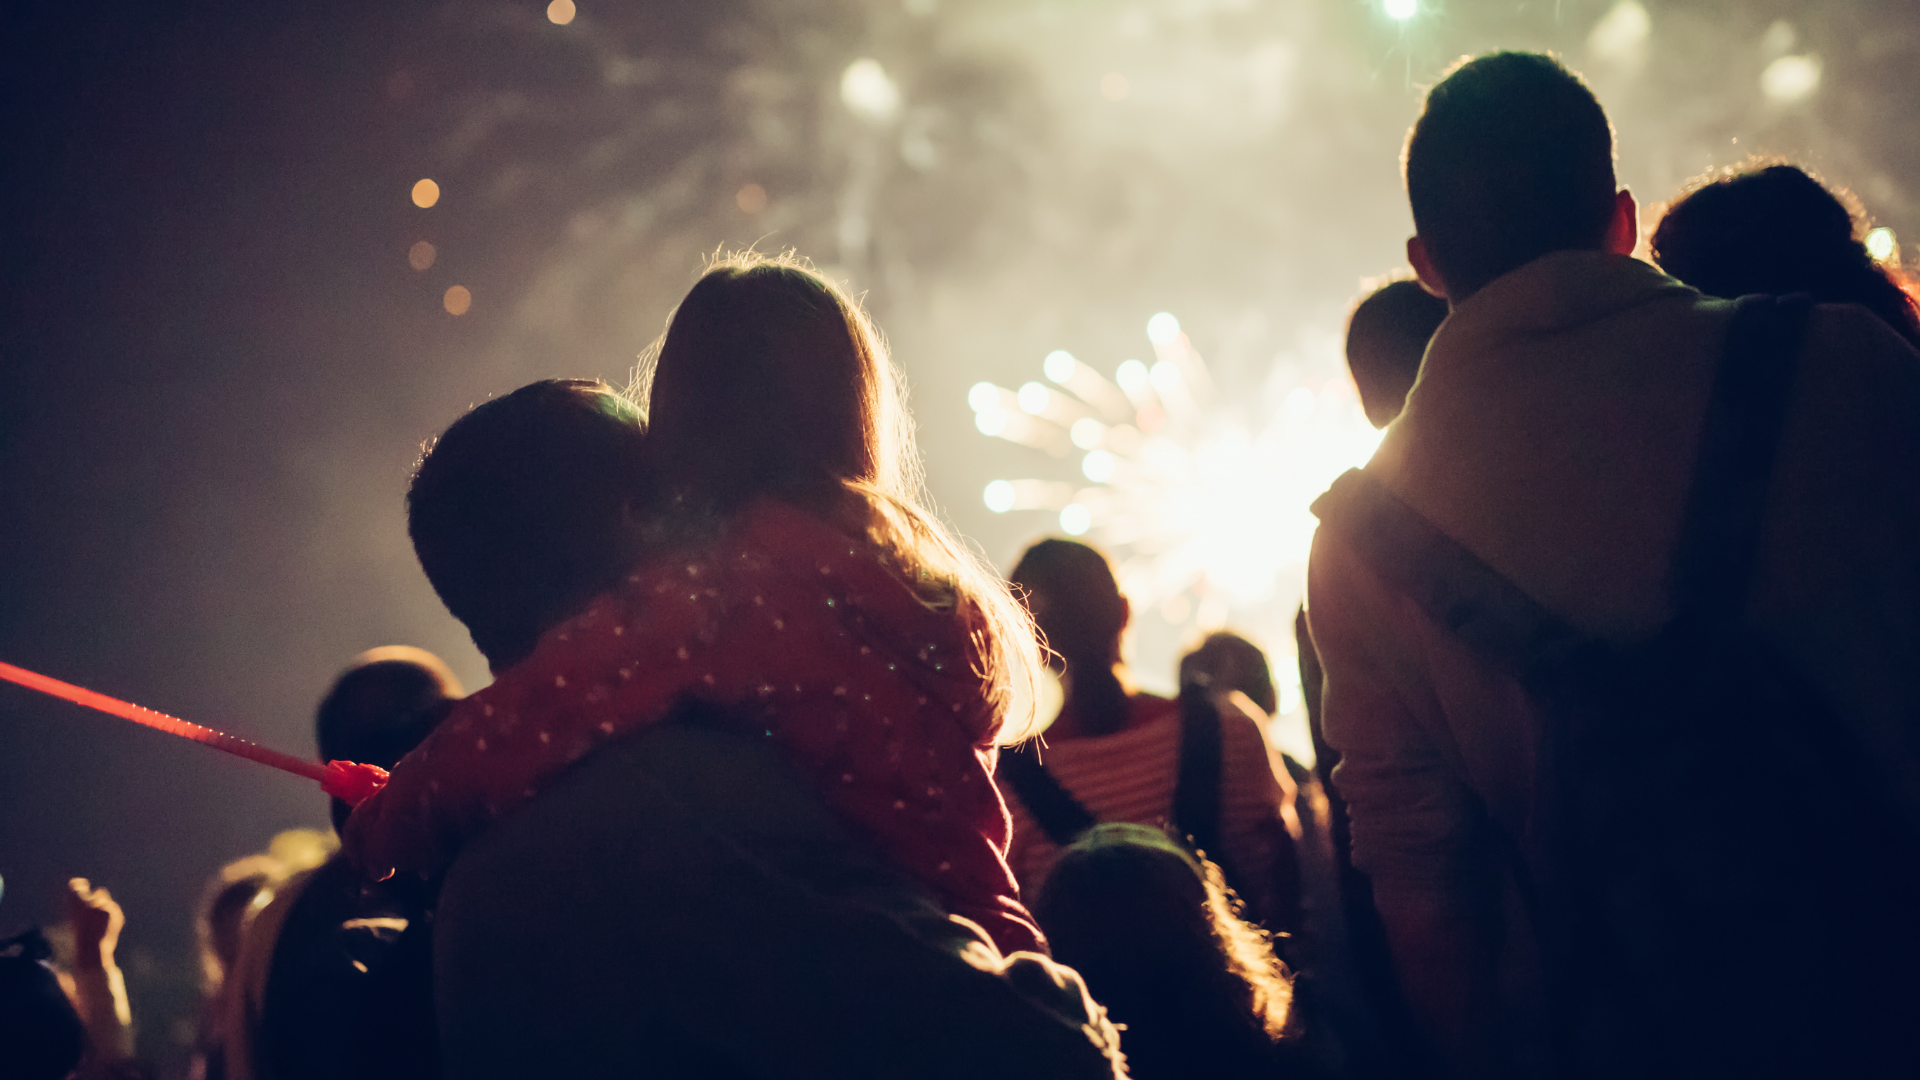 a group of people watching fireworks with their backs to the camera